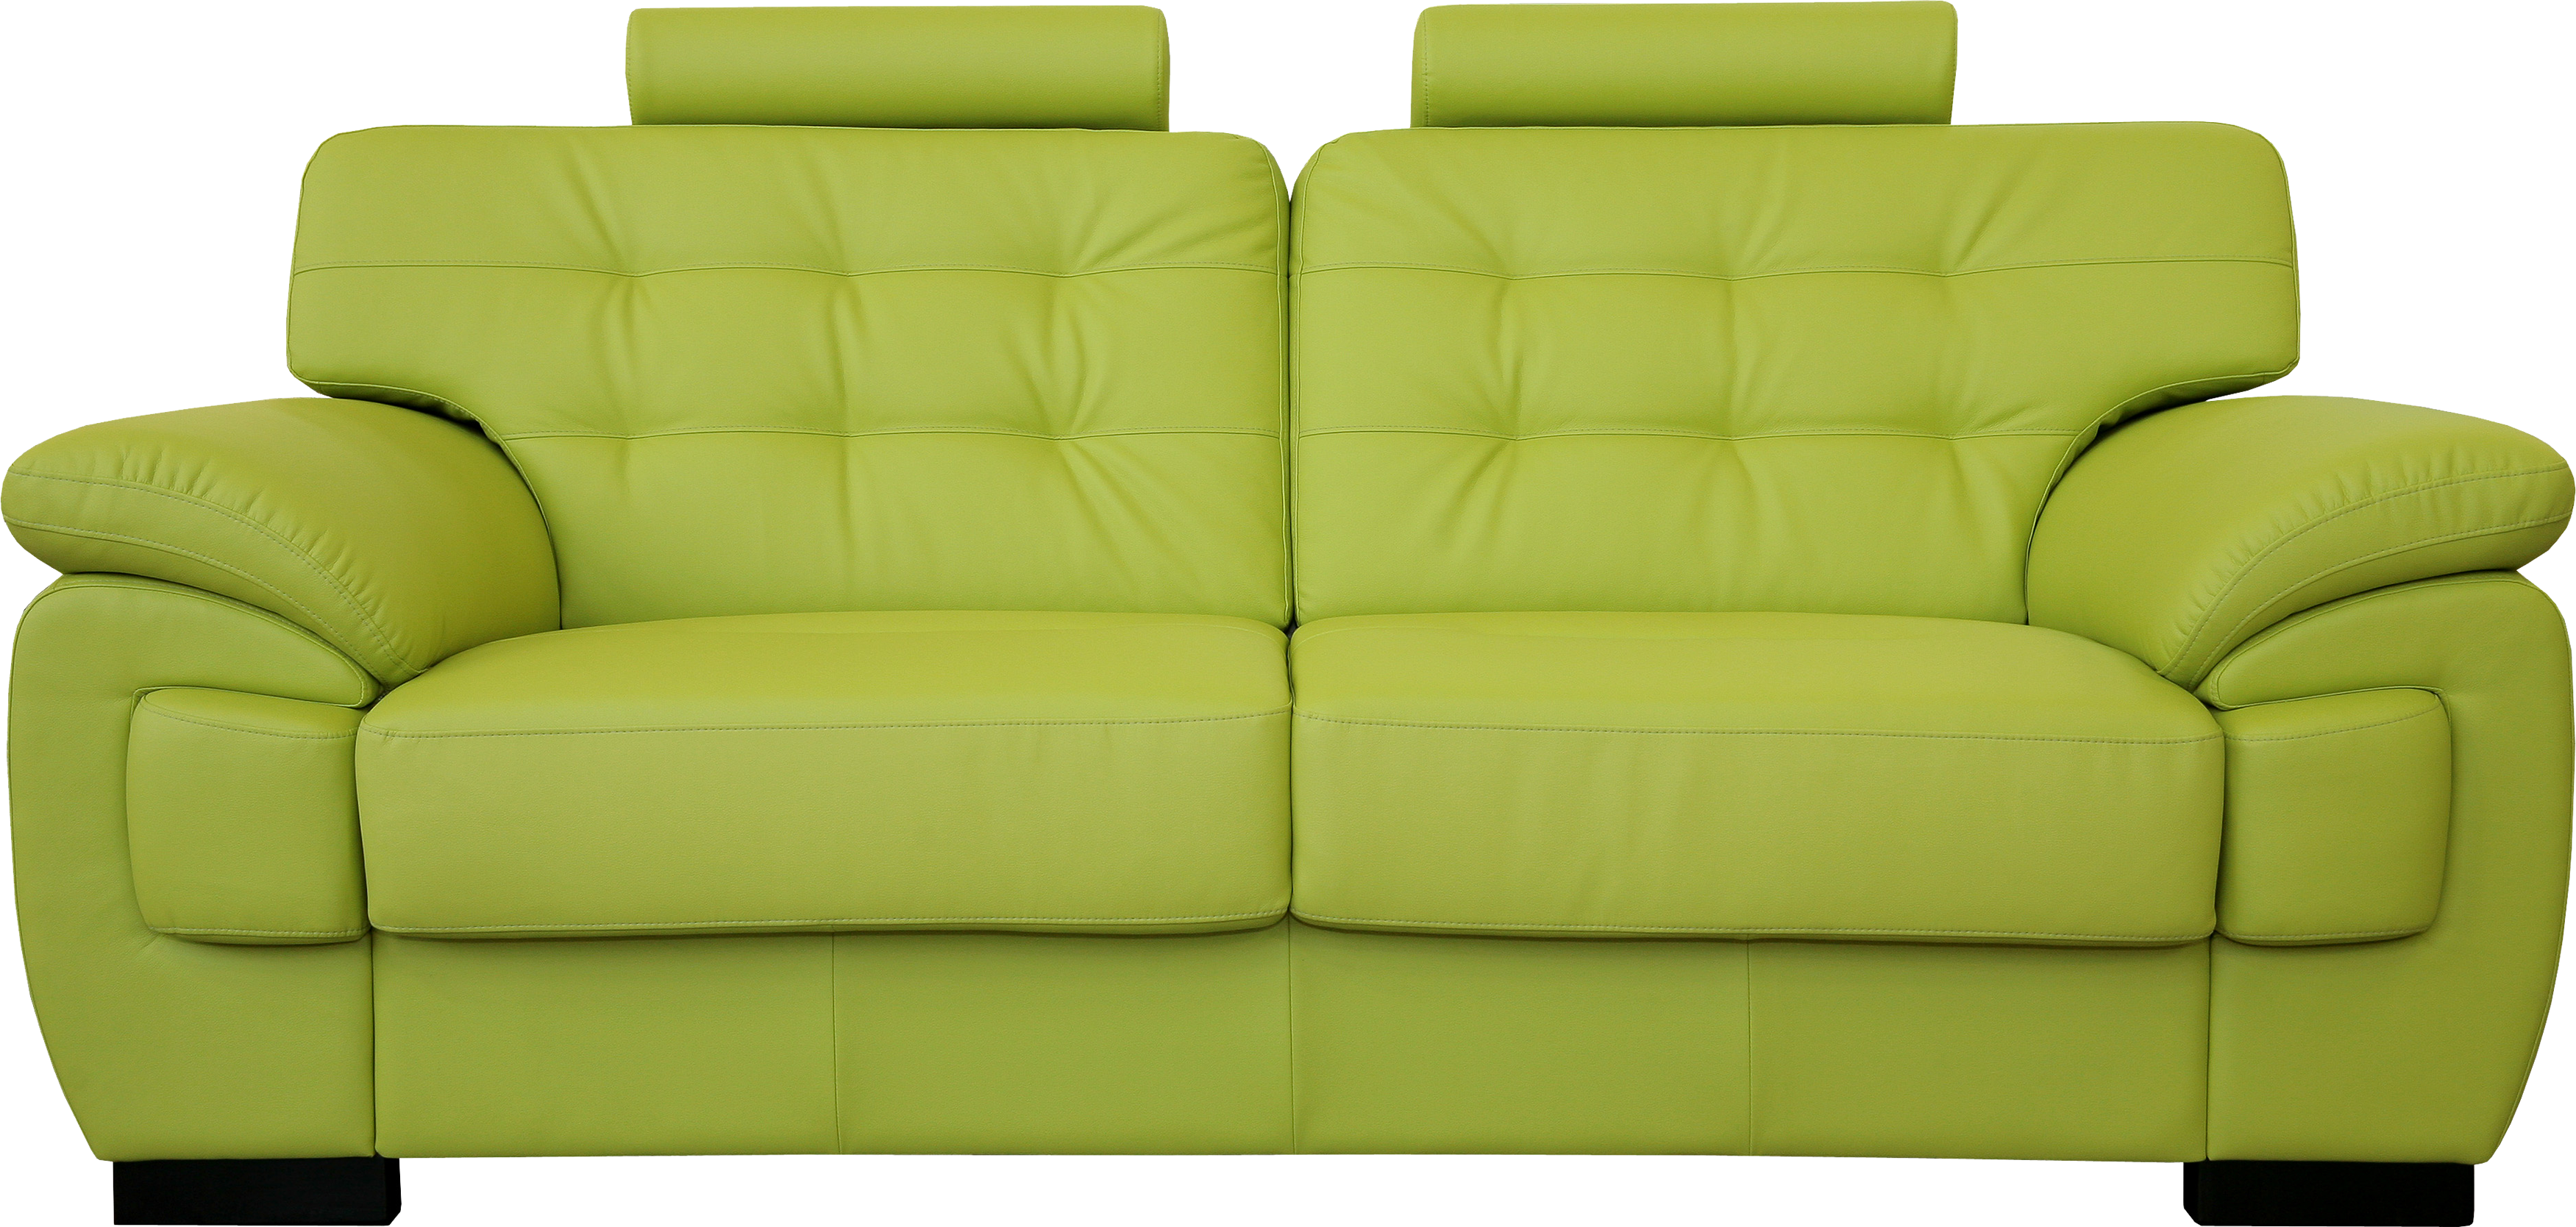 Green Sofa Png Image - Of A Bed, Transparent background PNG HD thumbnail